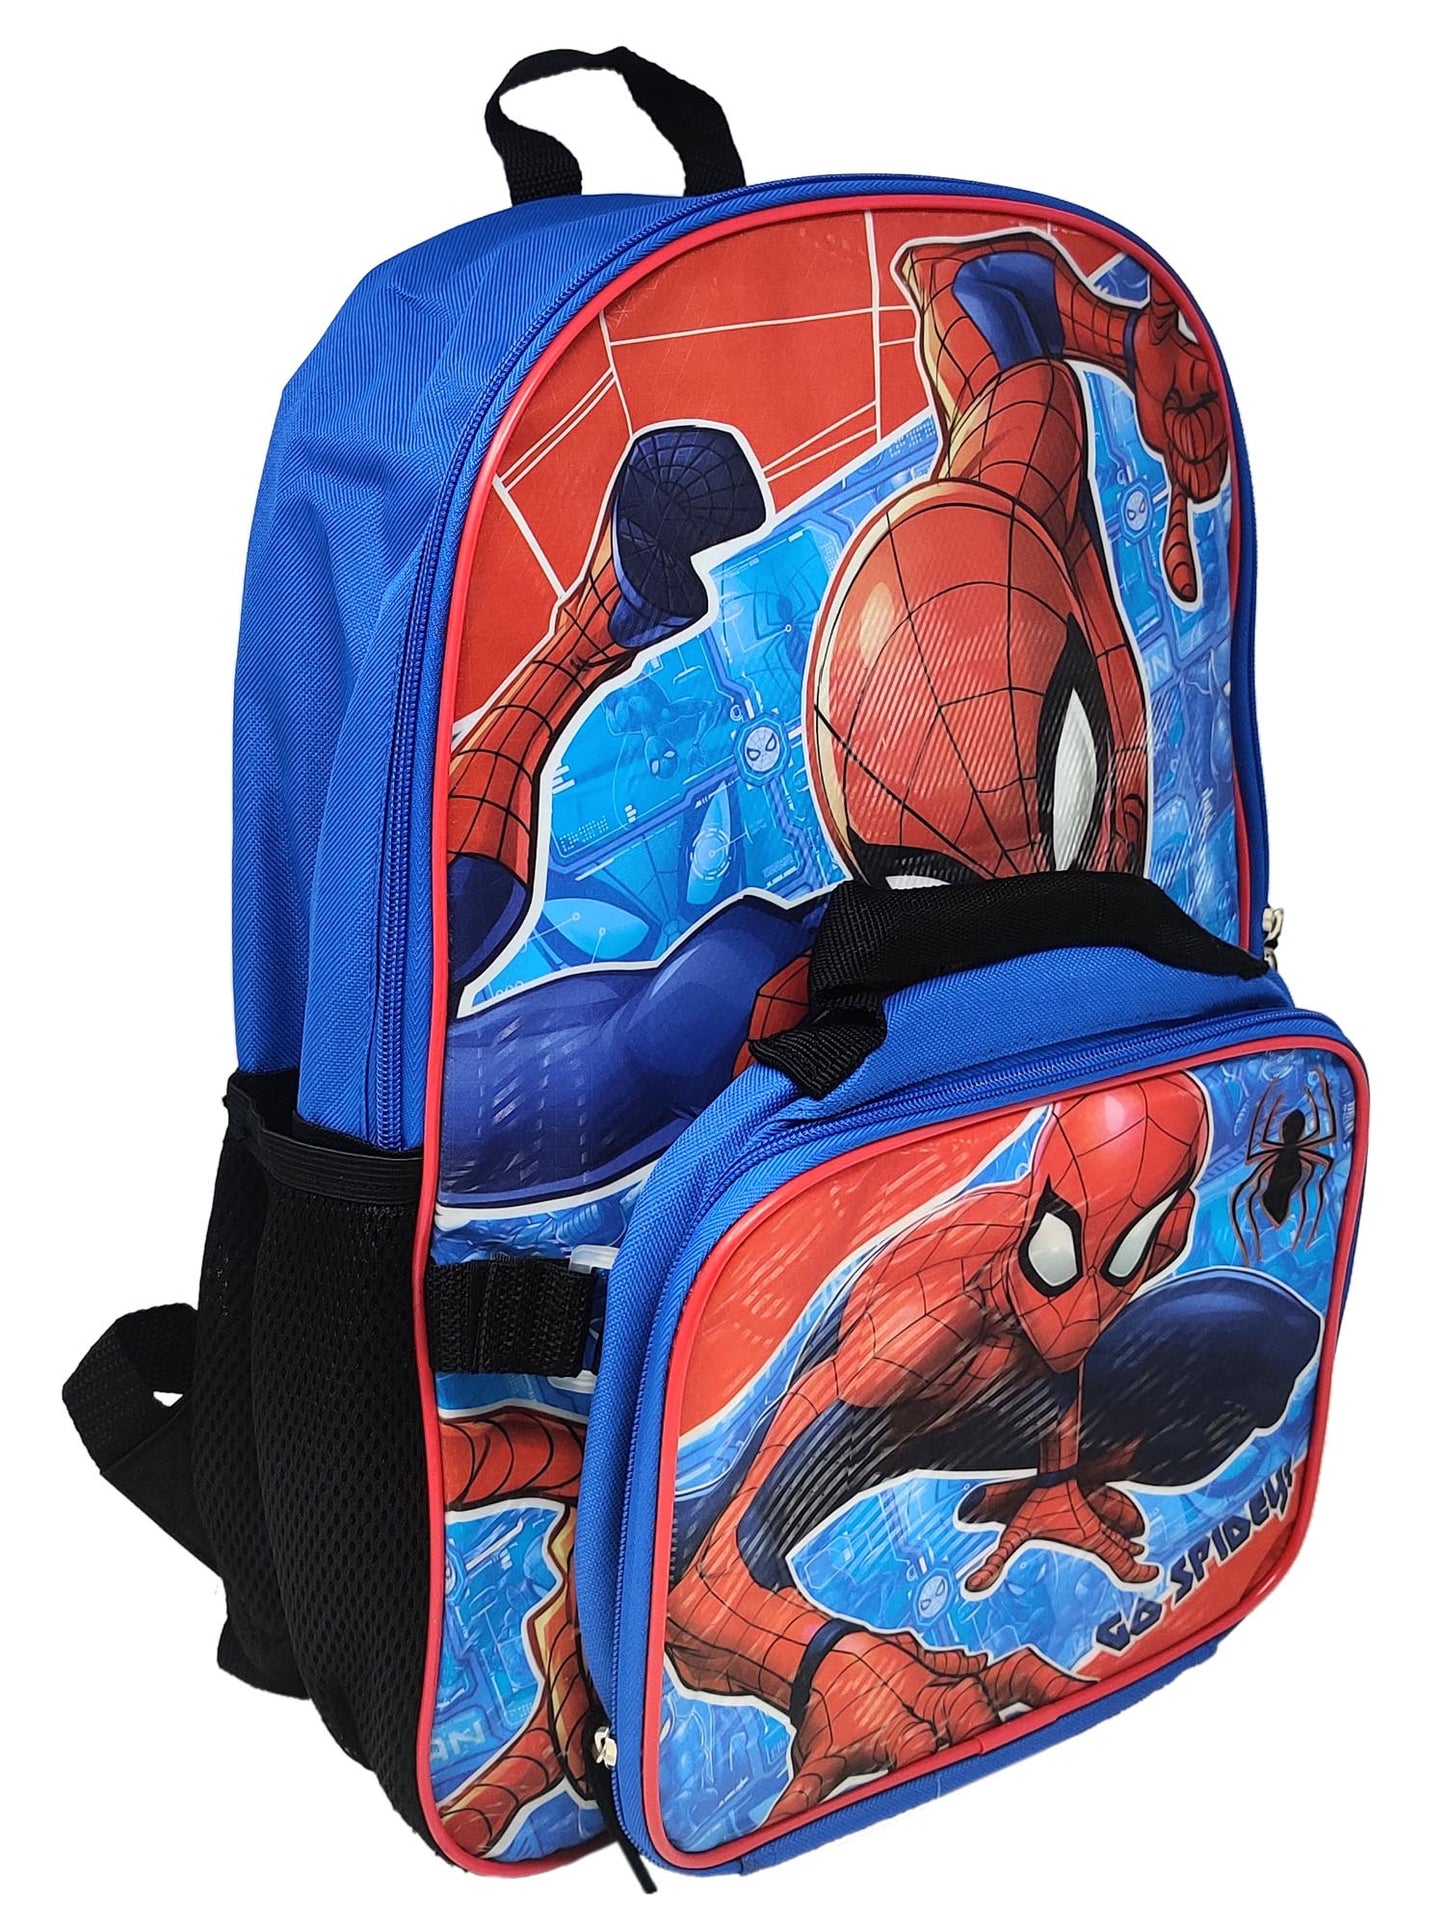 Spider-Man 16" Backpack & Insulated Lunch Bag Removable w/ Sticker Book Set